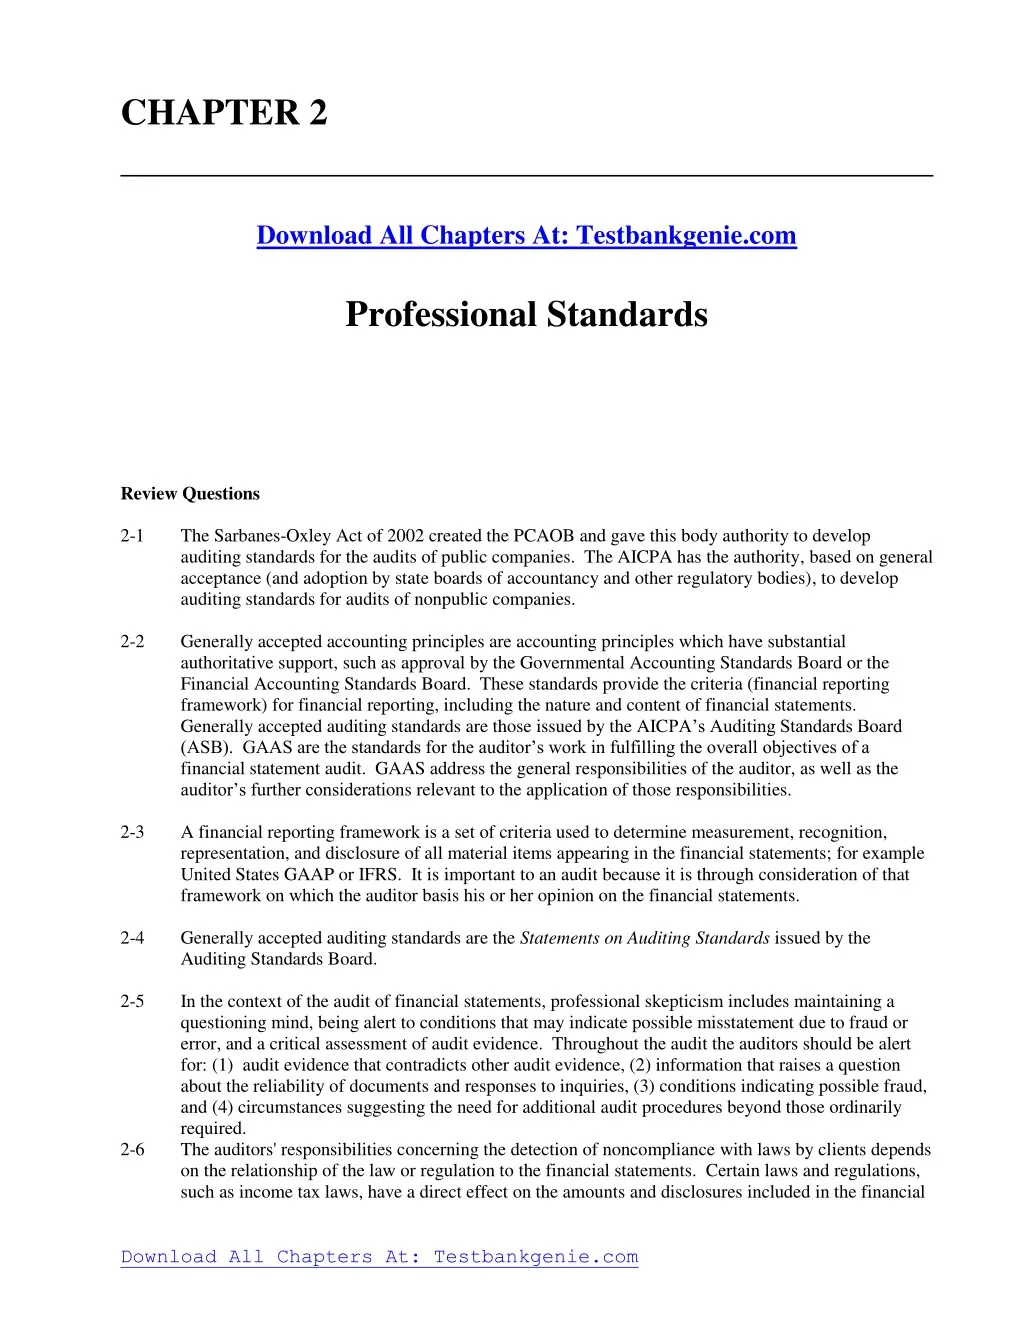 Principles of auditing and other assurance services homework solutions